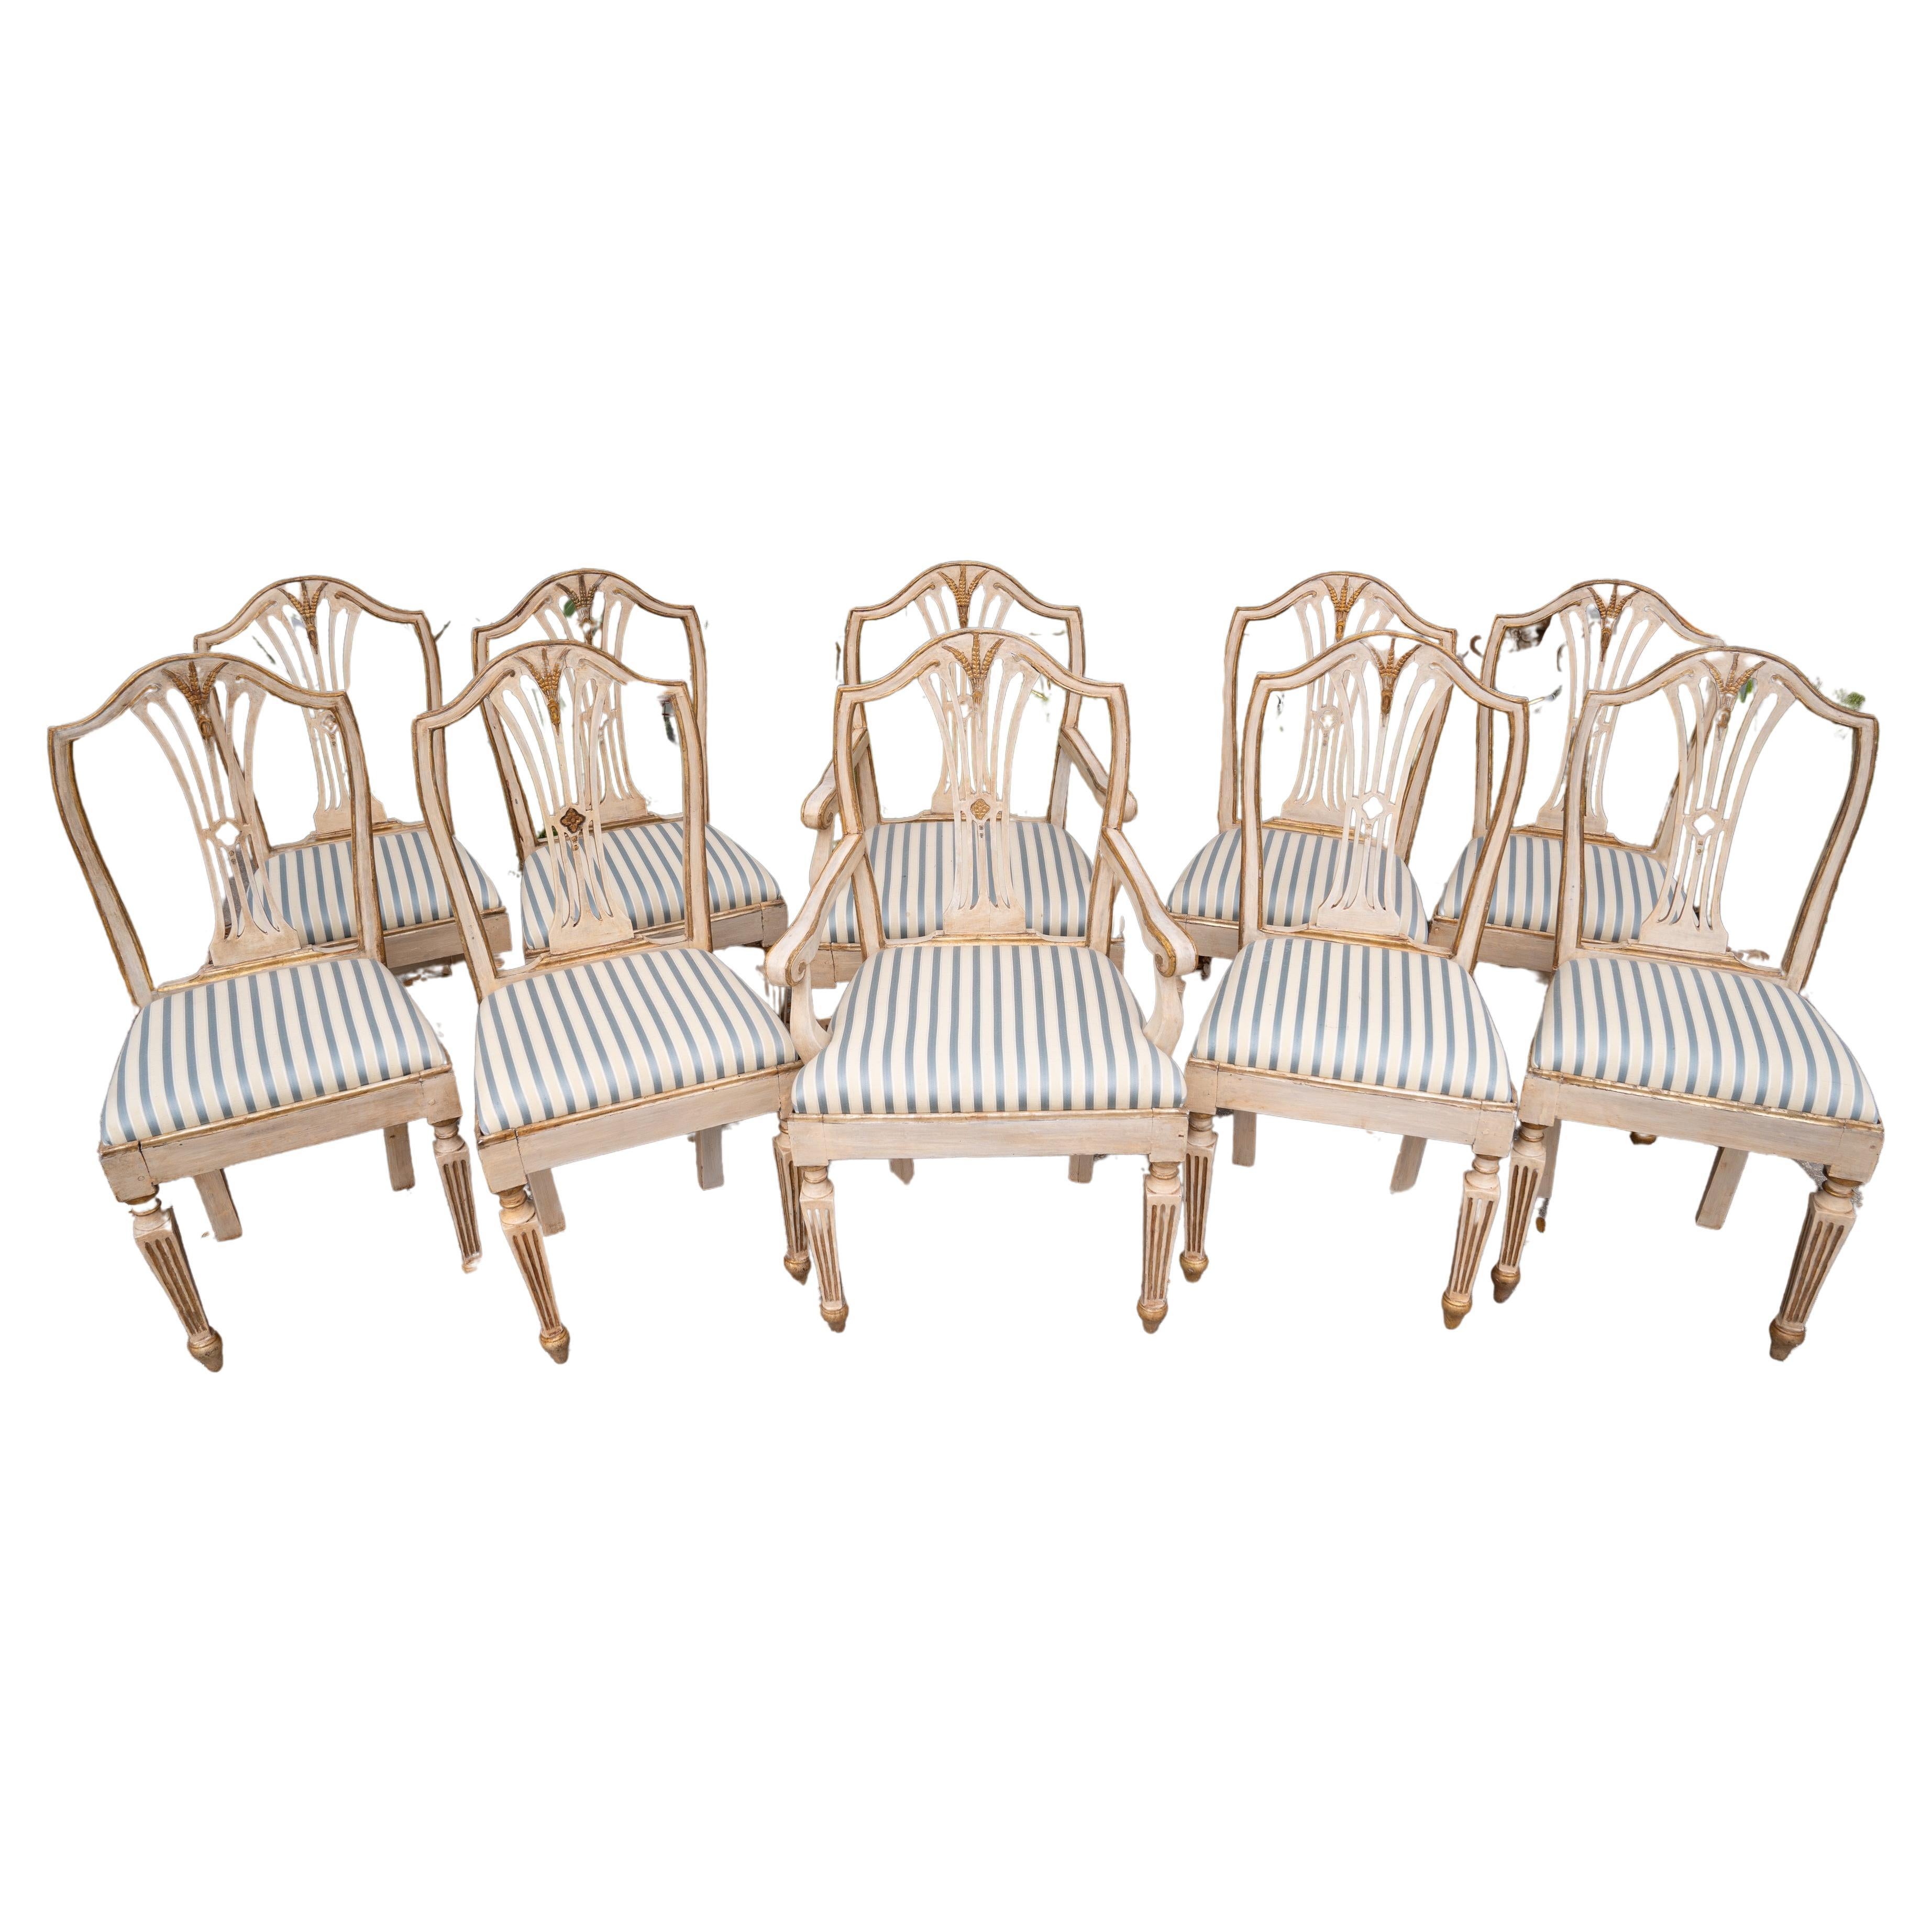 Set of 10 Louis XVI Style Painted and Gilded Chairs For Sale